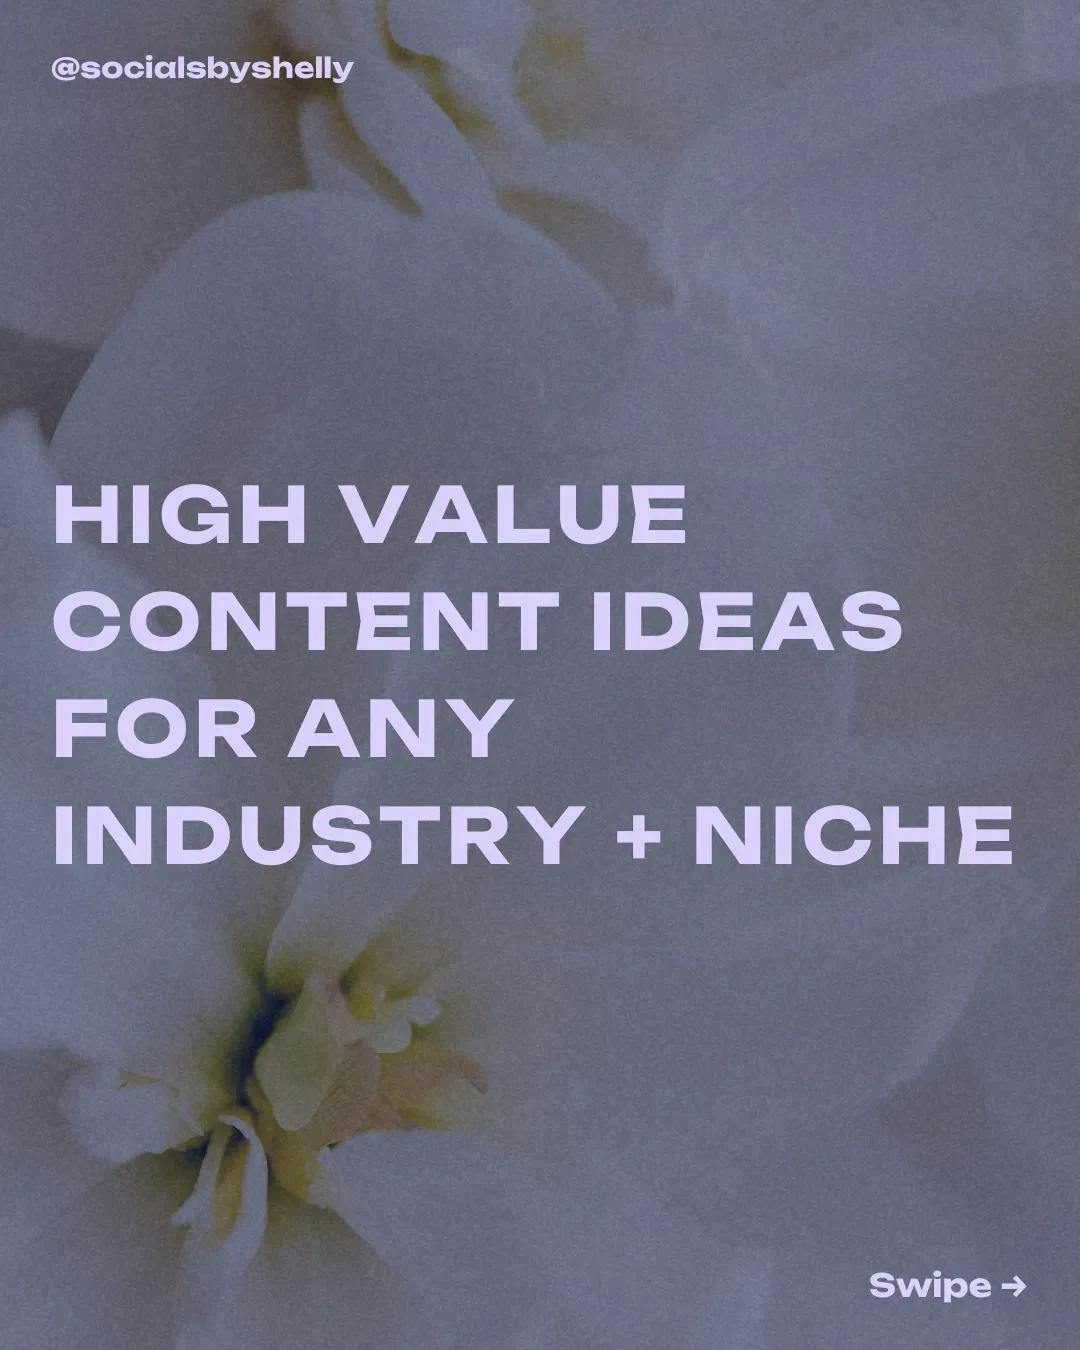 Instagram post title: HIGH VALUE CONTENT IDEAS FOR ANY INDUSTRY + NICHE